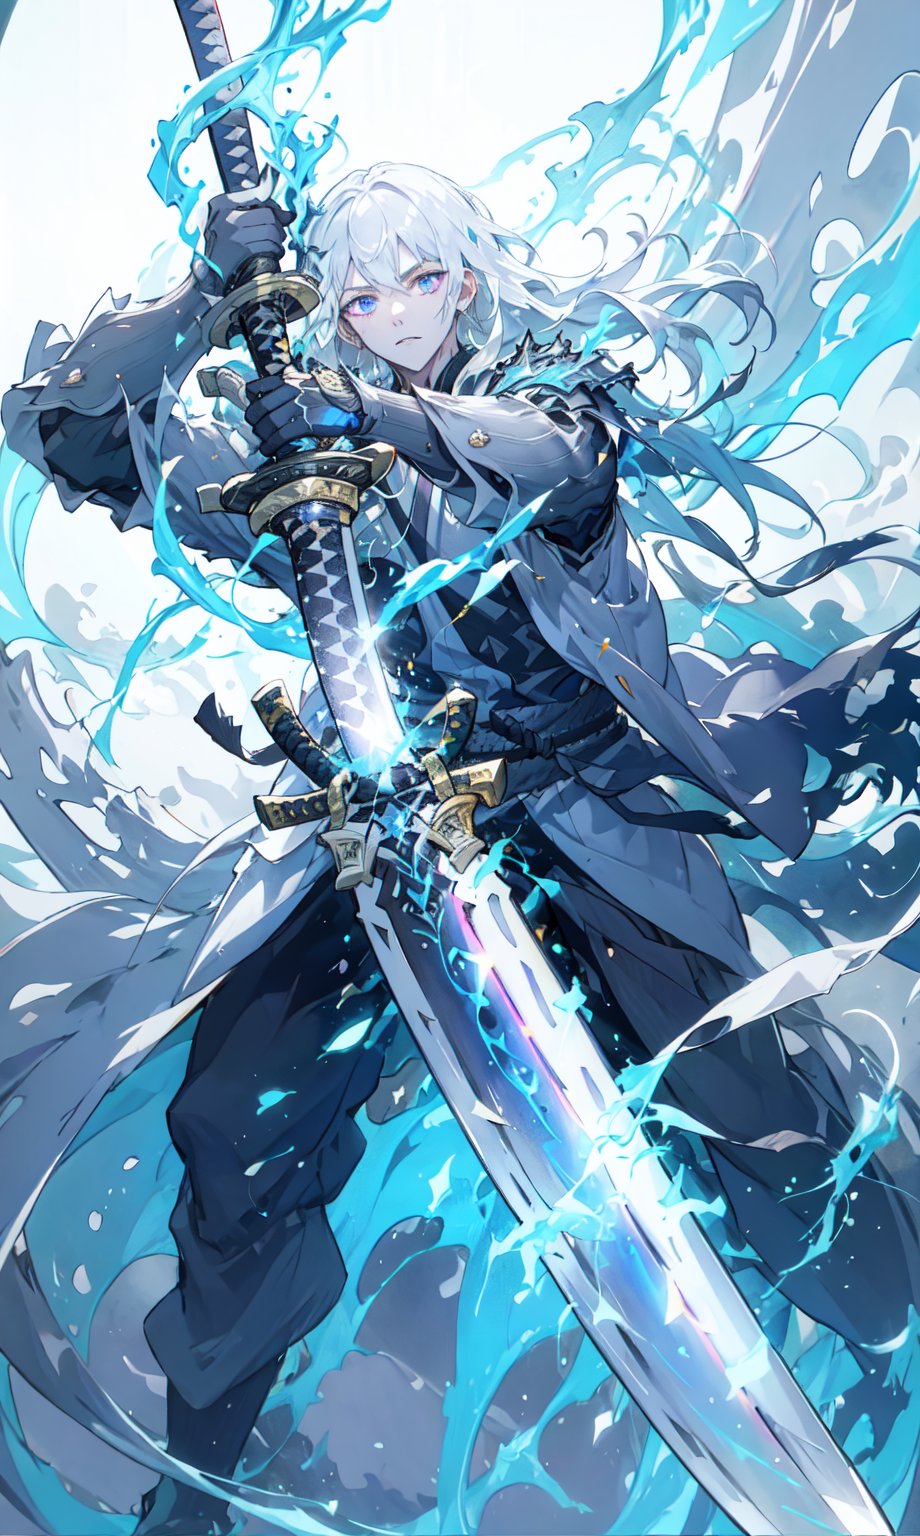 1male, 16k, hd, detailed, futuristic, masterpiece,katana,samurai, detailed face, complex_background,no_humans, detailed face, beautiful detailed eyes), High contrast, (best illumination, an extremely delicate and beautiful),dynamic pose, warzone,((holding flaming sword with two hands, katana)), blue flames, glow, glowing weapon, light particles, long white hair, BLUE  FIRE, shining blade, long blade,scenery,RED FIRE GREEN FIRE BLUE FIRE PURPLE FIRe